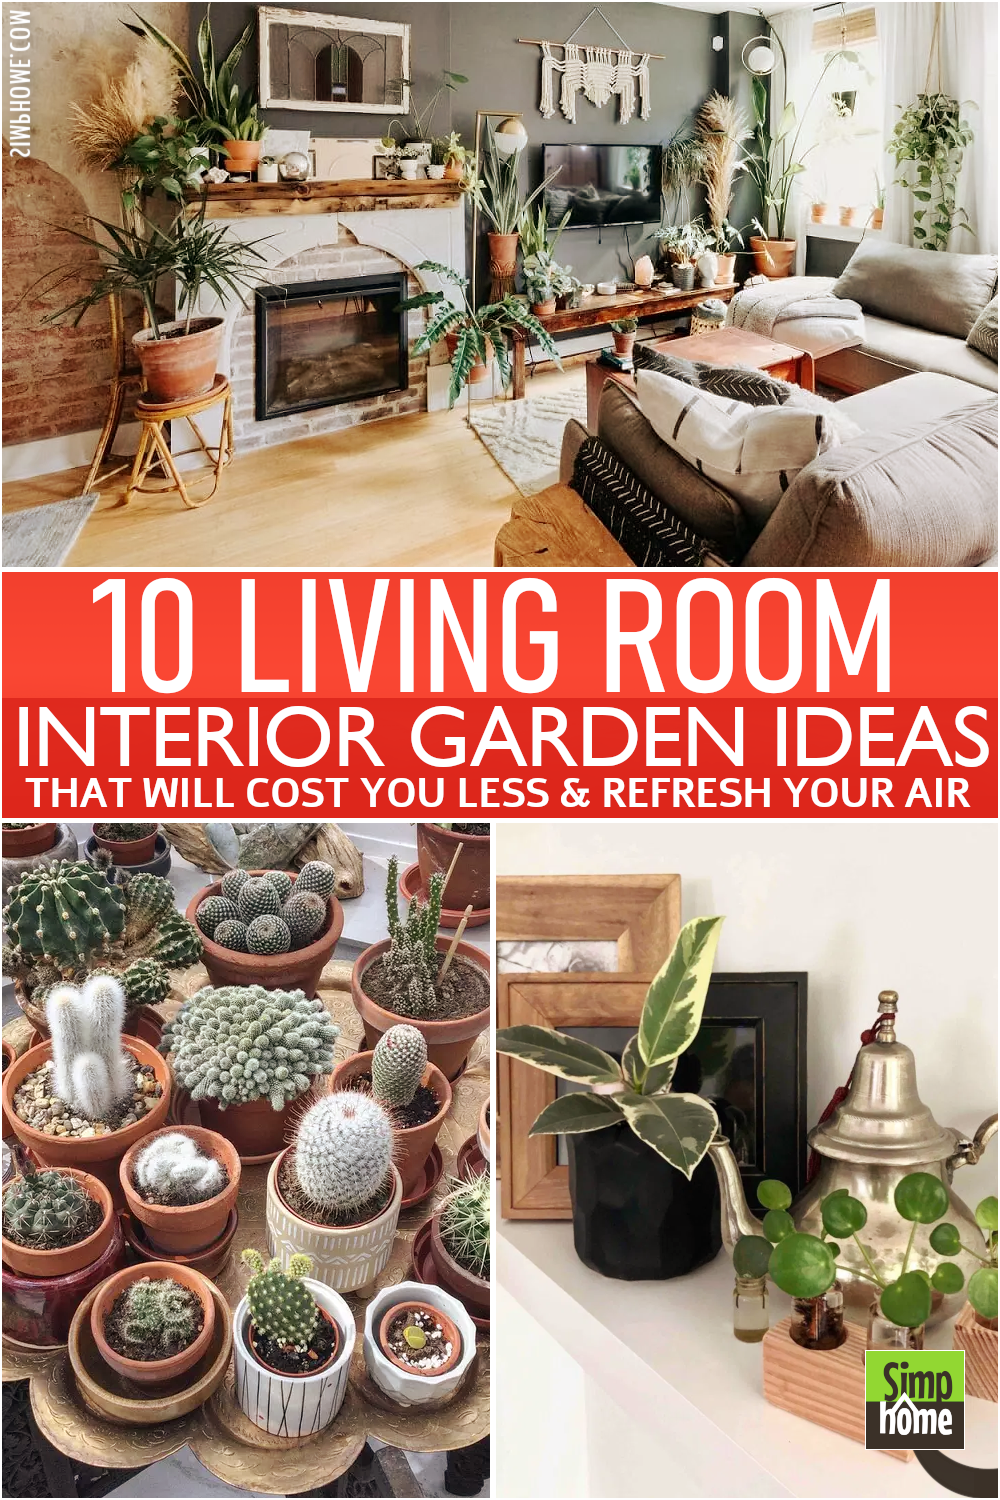 This is 10 Living Room Garden Ideas Poster